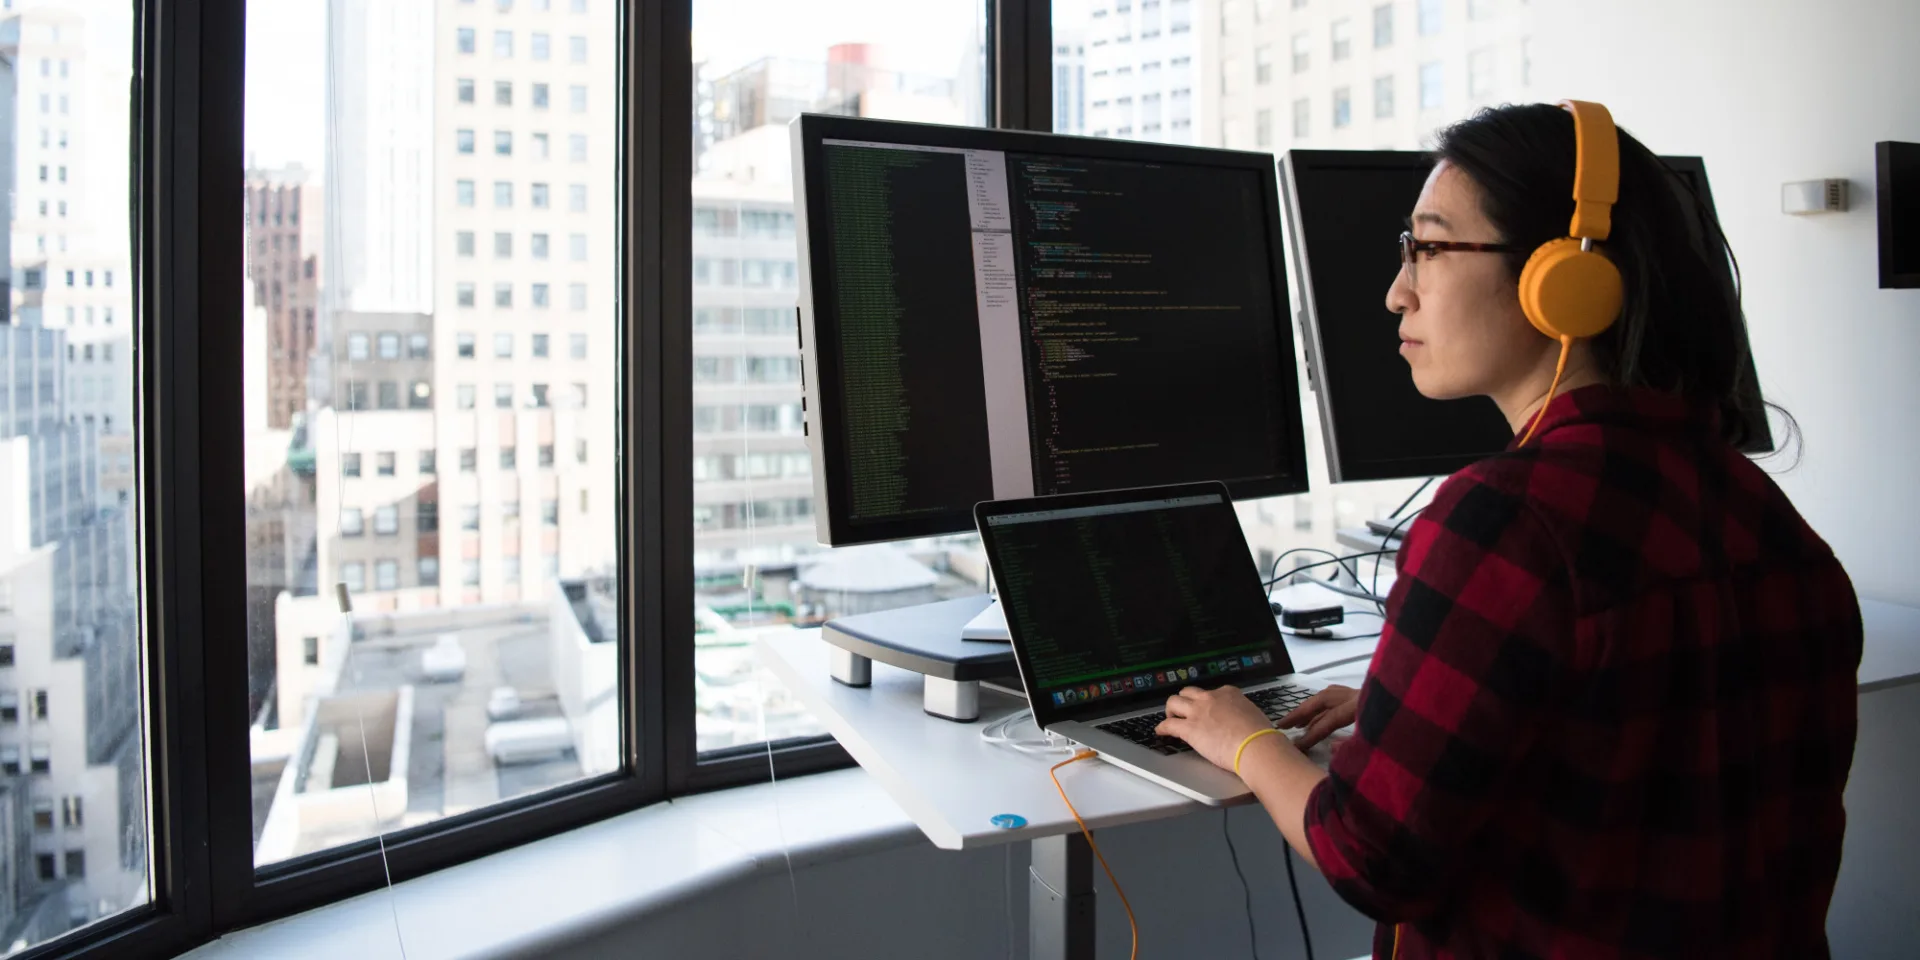 Woman coding on computer in front of large window with view of the city.